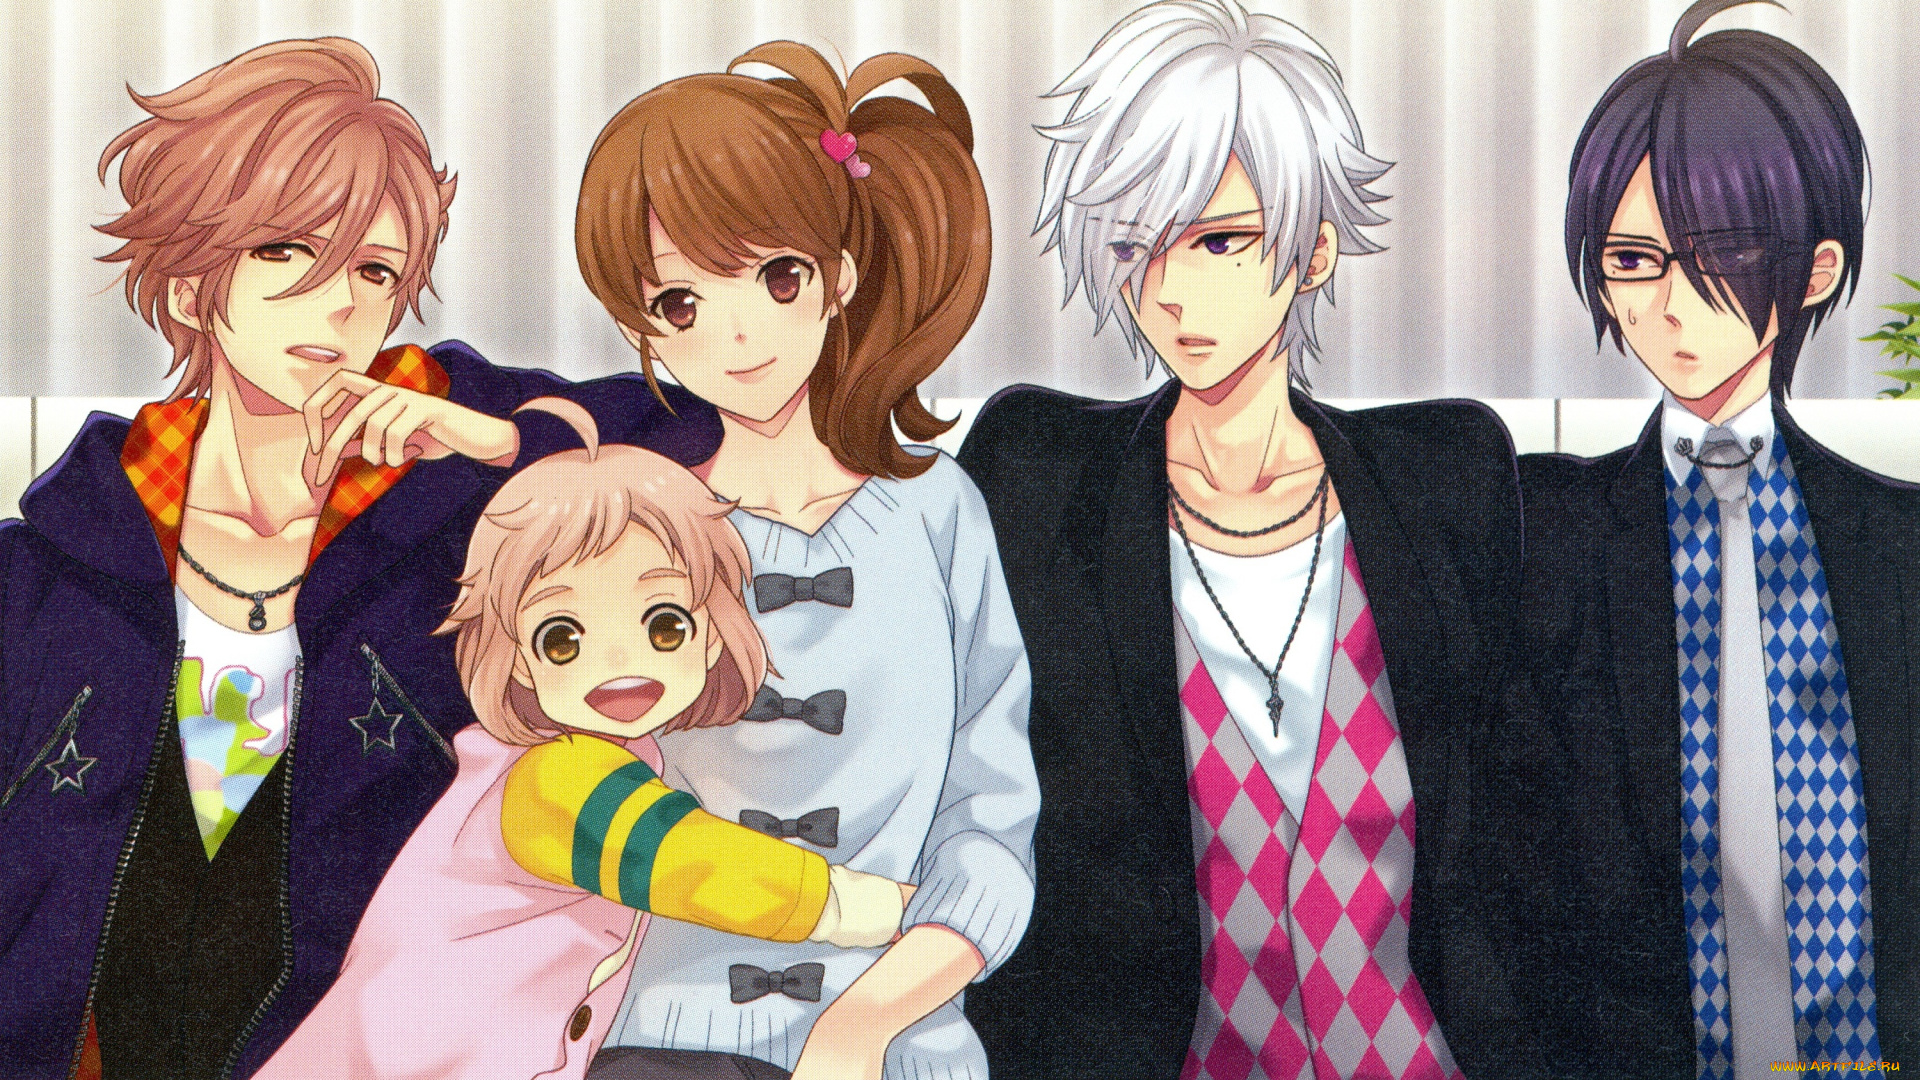 аниме, brothers, conflict, brothers, conflict